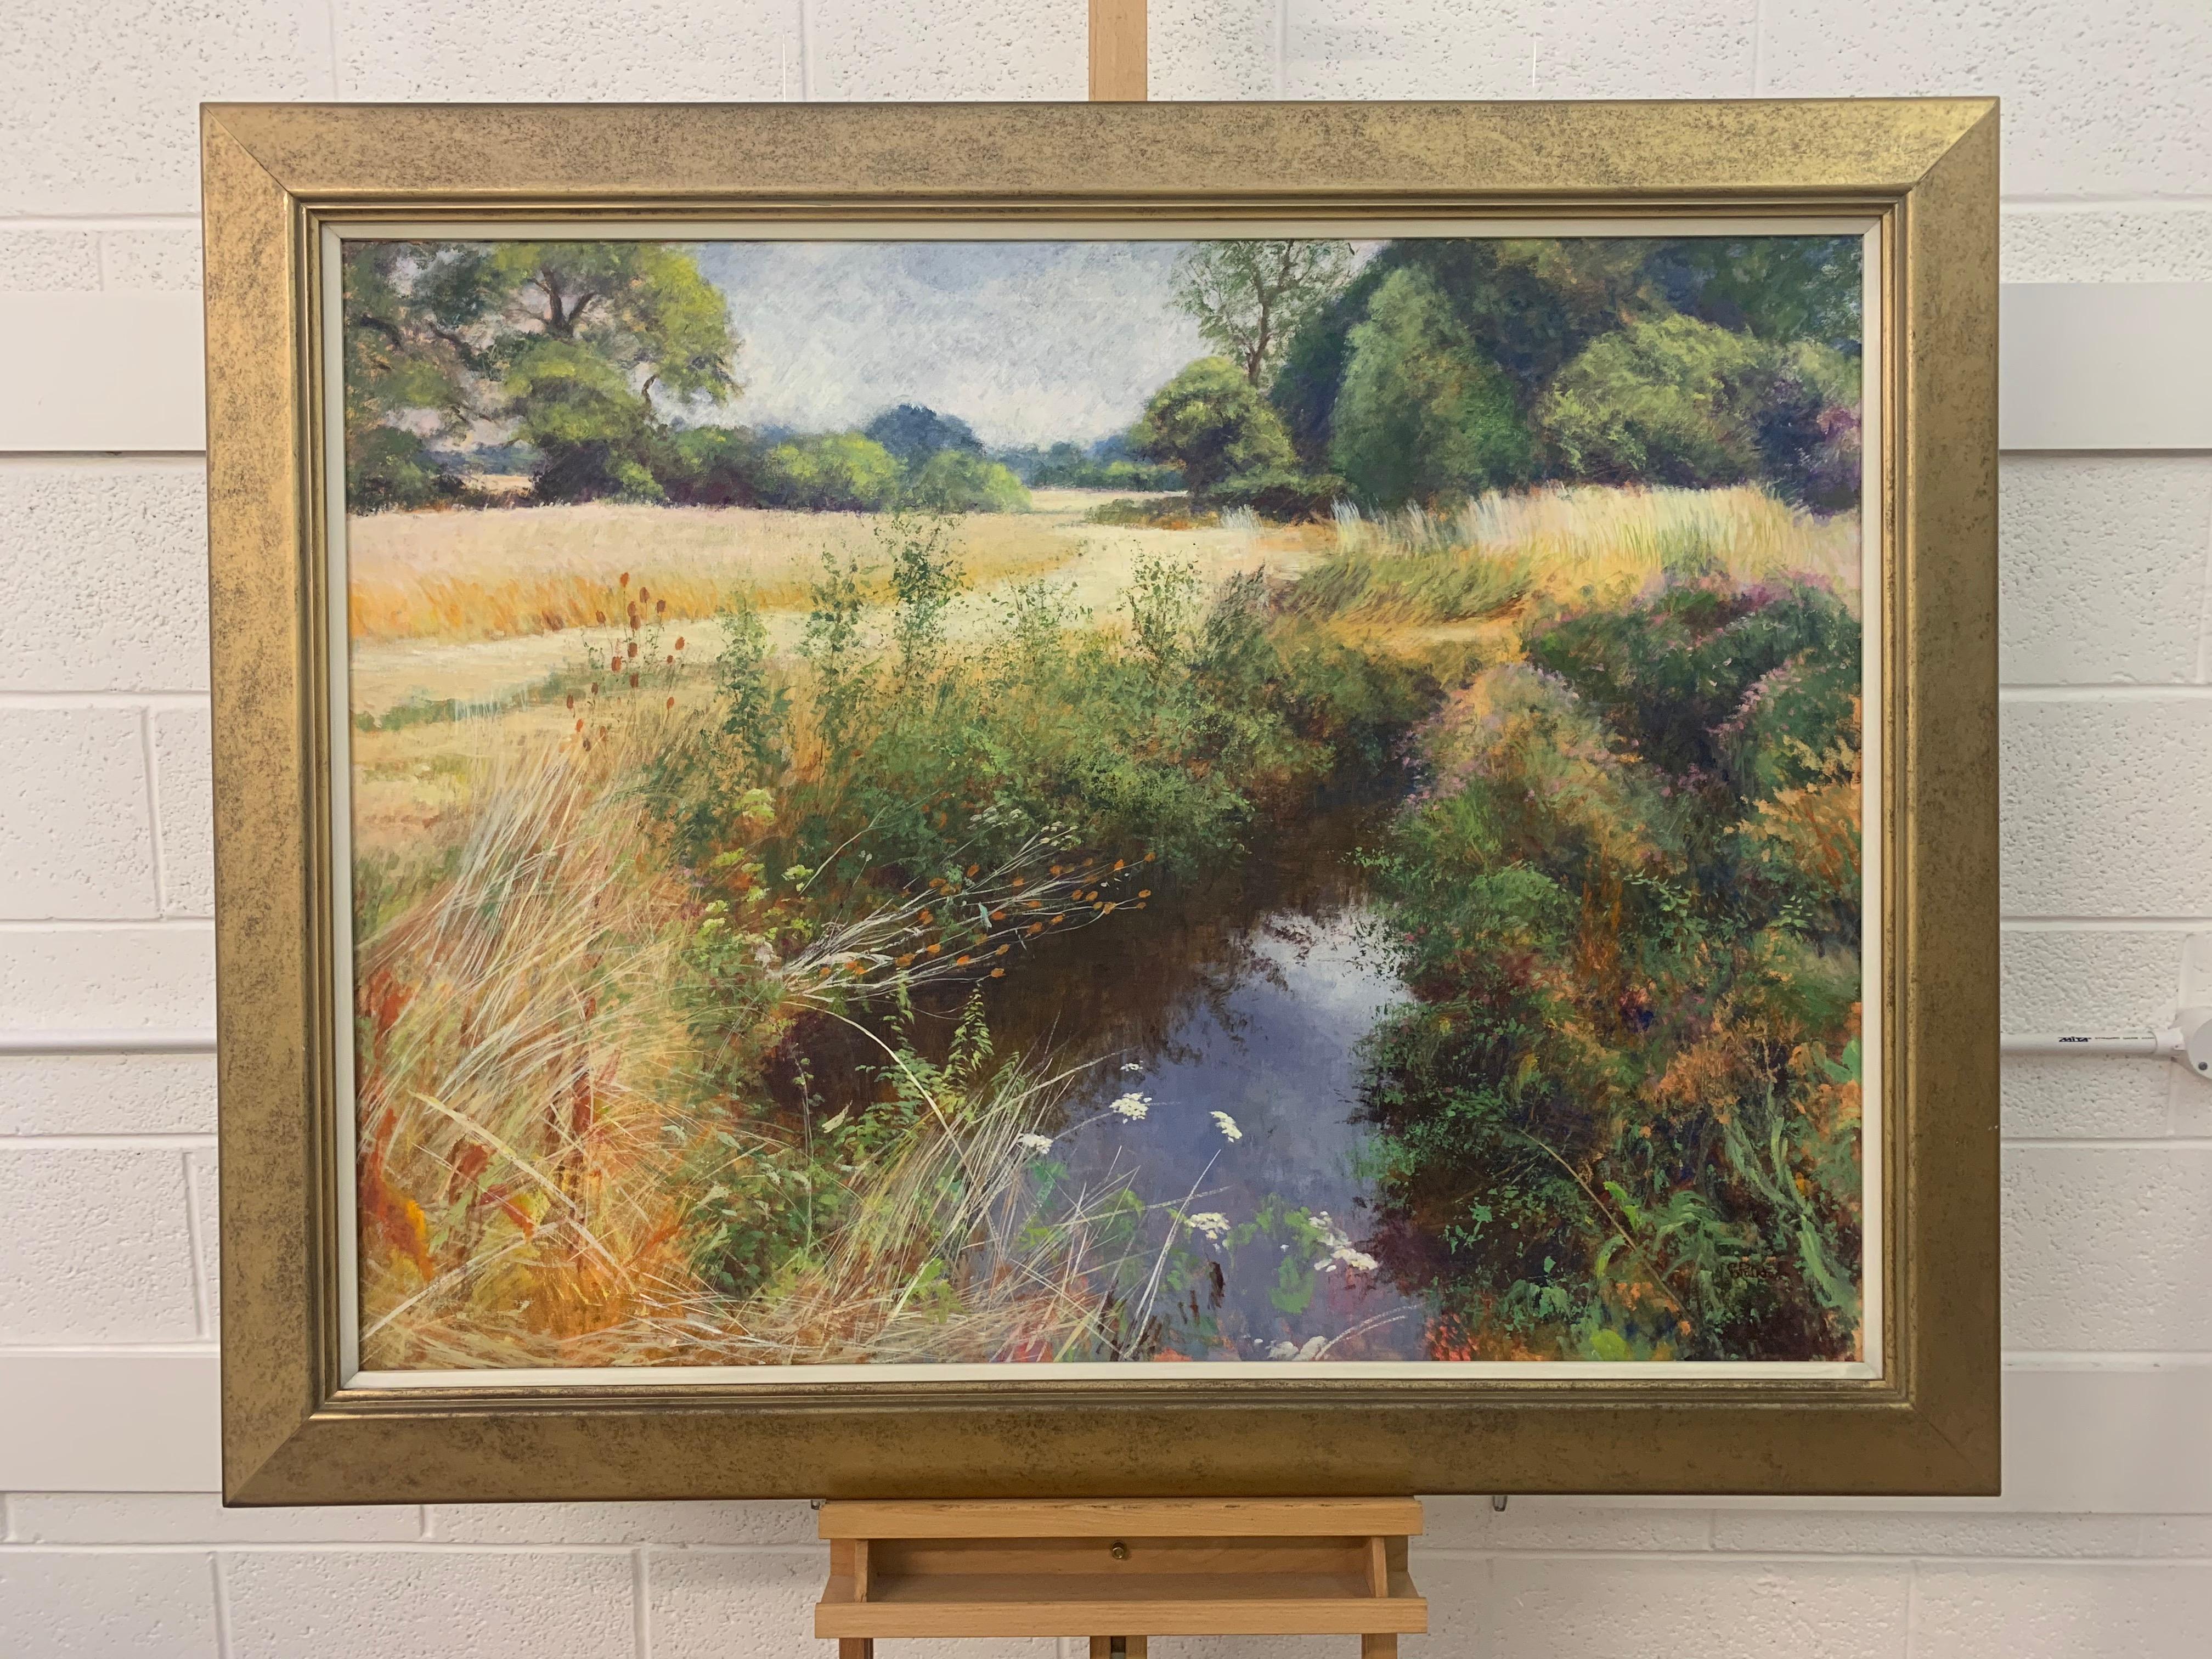 English High Summer Riverbank Landscape Original Oil Painting by Artist Graham Painter (British 20th Century, 1947-2007).
Country Stream, Oil on Canvas, framed in a high quality gold moulding.

Art measures 49.5 x 35.5 inches
Frame measures 57 x 43